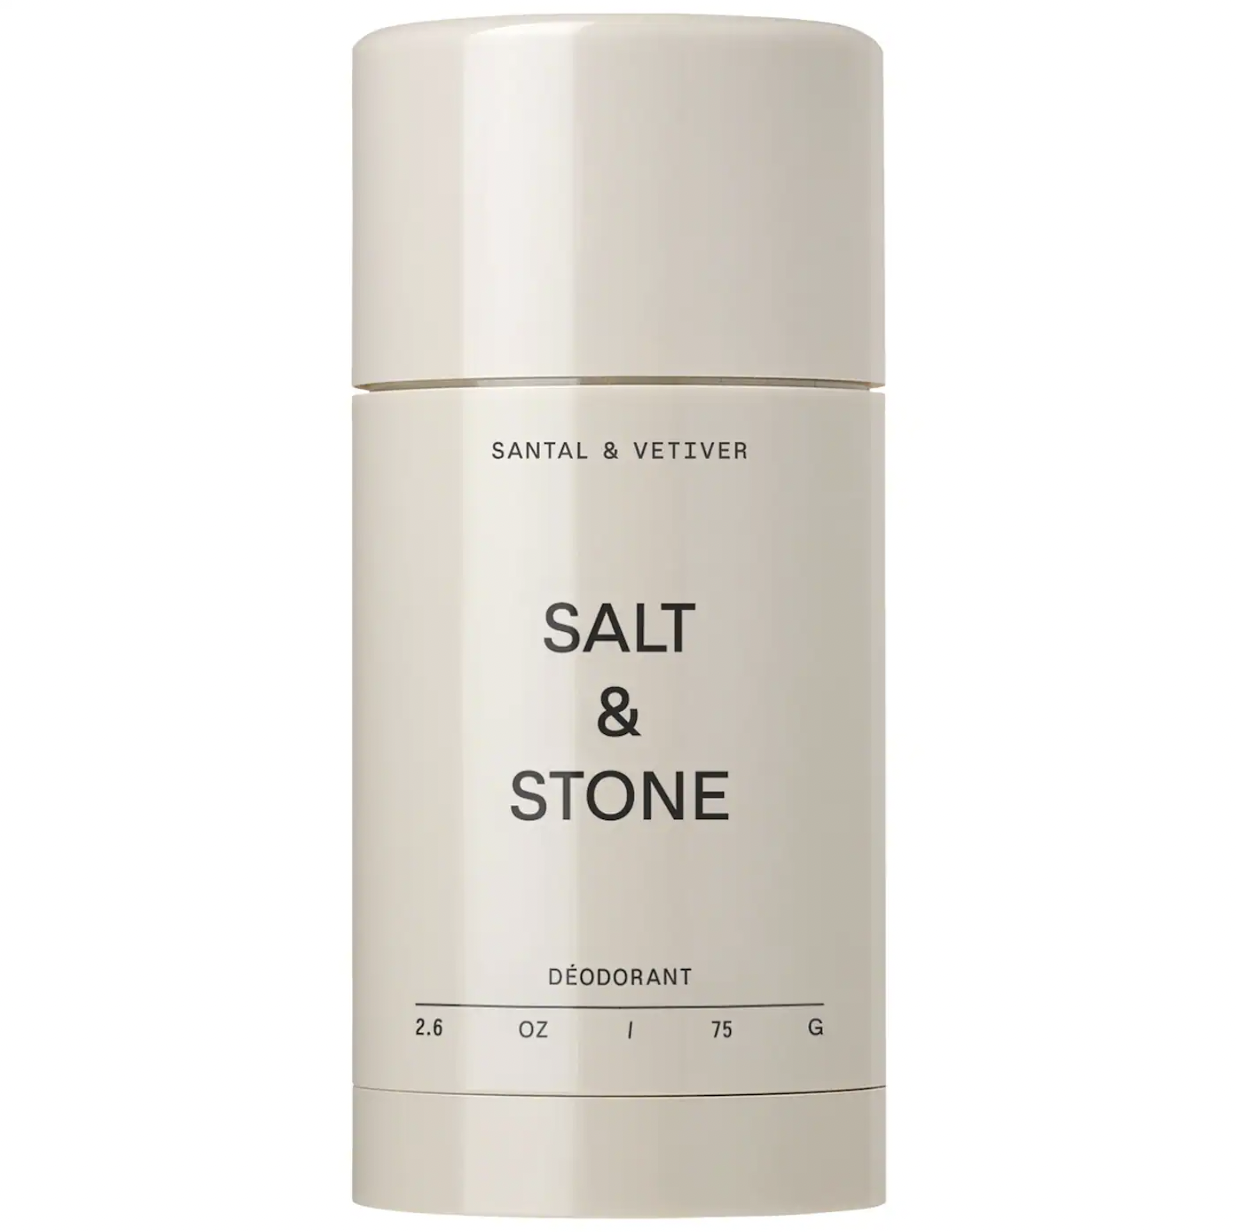 <p><strong>$20.00</strong></p><p><a href="https://go.redirectingat.com?id=74968X1553576&url=https%3A%2F%2Fwww.sephora.com%2Fproduct%2Fsalt-stone-santal-vetiver-extra-strength-aluminum-free-deodorant-P510340&sref=https%3A%2F%2Fwww.harpersbazaar.com%2Fbeauty%2Fhealth%2Fg60141967%2Fbest-deodorant-brands%2F">Shop Now</a></p><p>Santal & Vetiver, Neroli & Basil, Black Rose & Oud—no, these aren't perfumes, they're Salt & Stone deos. Not only do their products smell genuinely fantastic, but the brand has nailed the "so fancy you'll actually want to leave it out" vibe. </p><p><strong>Customer Review:</strong></p><p>"This stuff is my HOLY GRAIL!!! I have been trying a ton of aluminum free deodorants and have been struggling to find one that 1. Smells good and 2. Actually masks and holds sweat. This does the wonders of both. Highly recommend" —giannaf5</p>